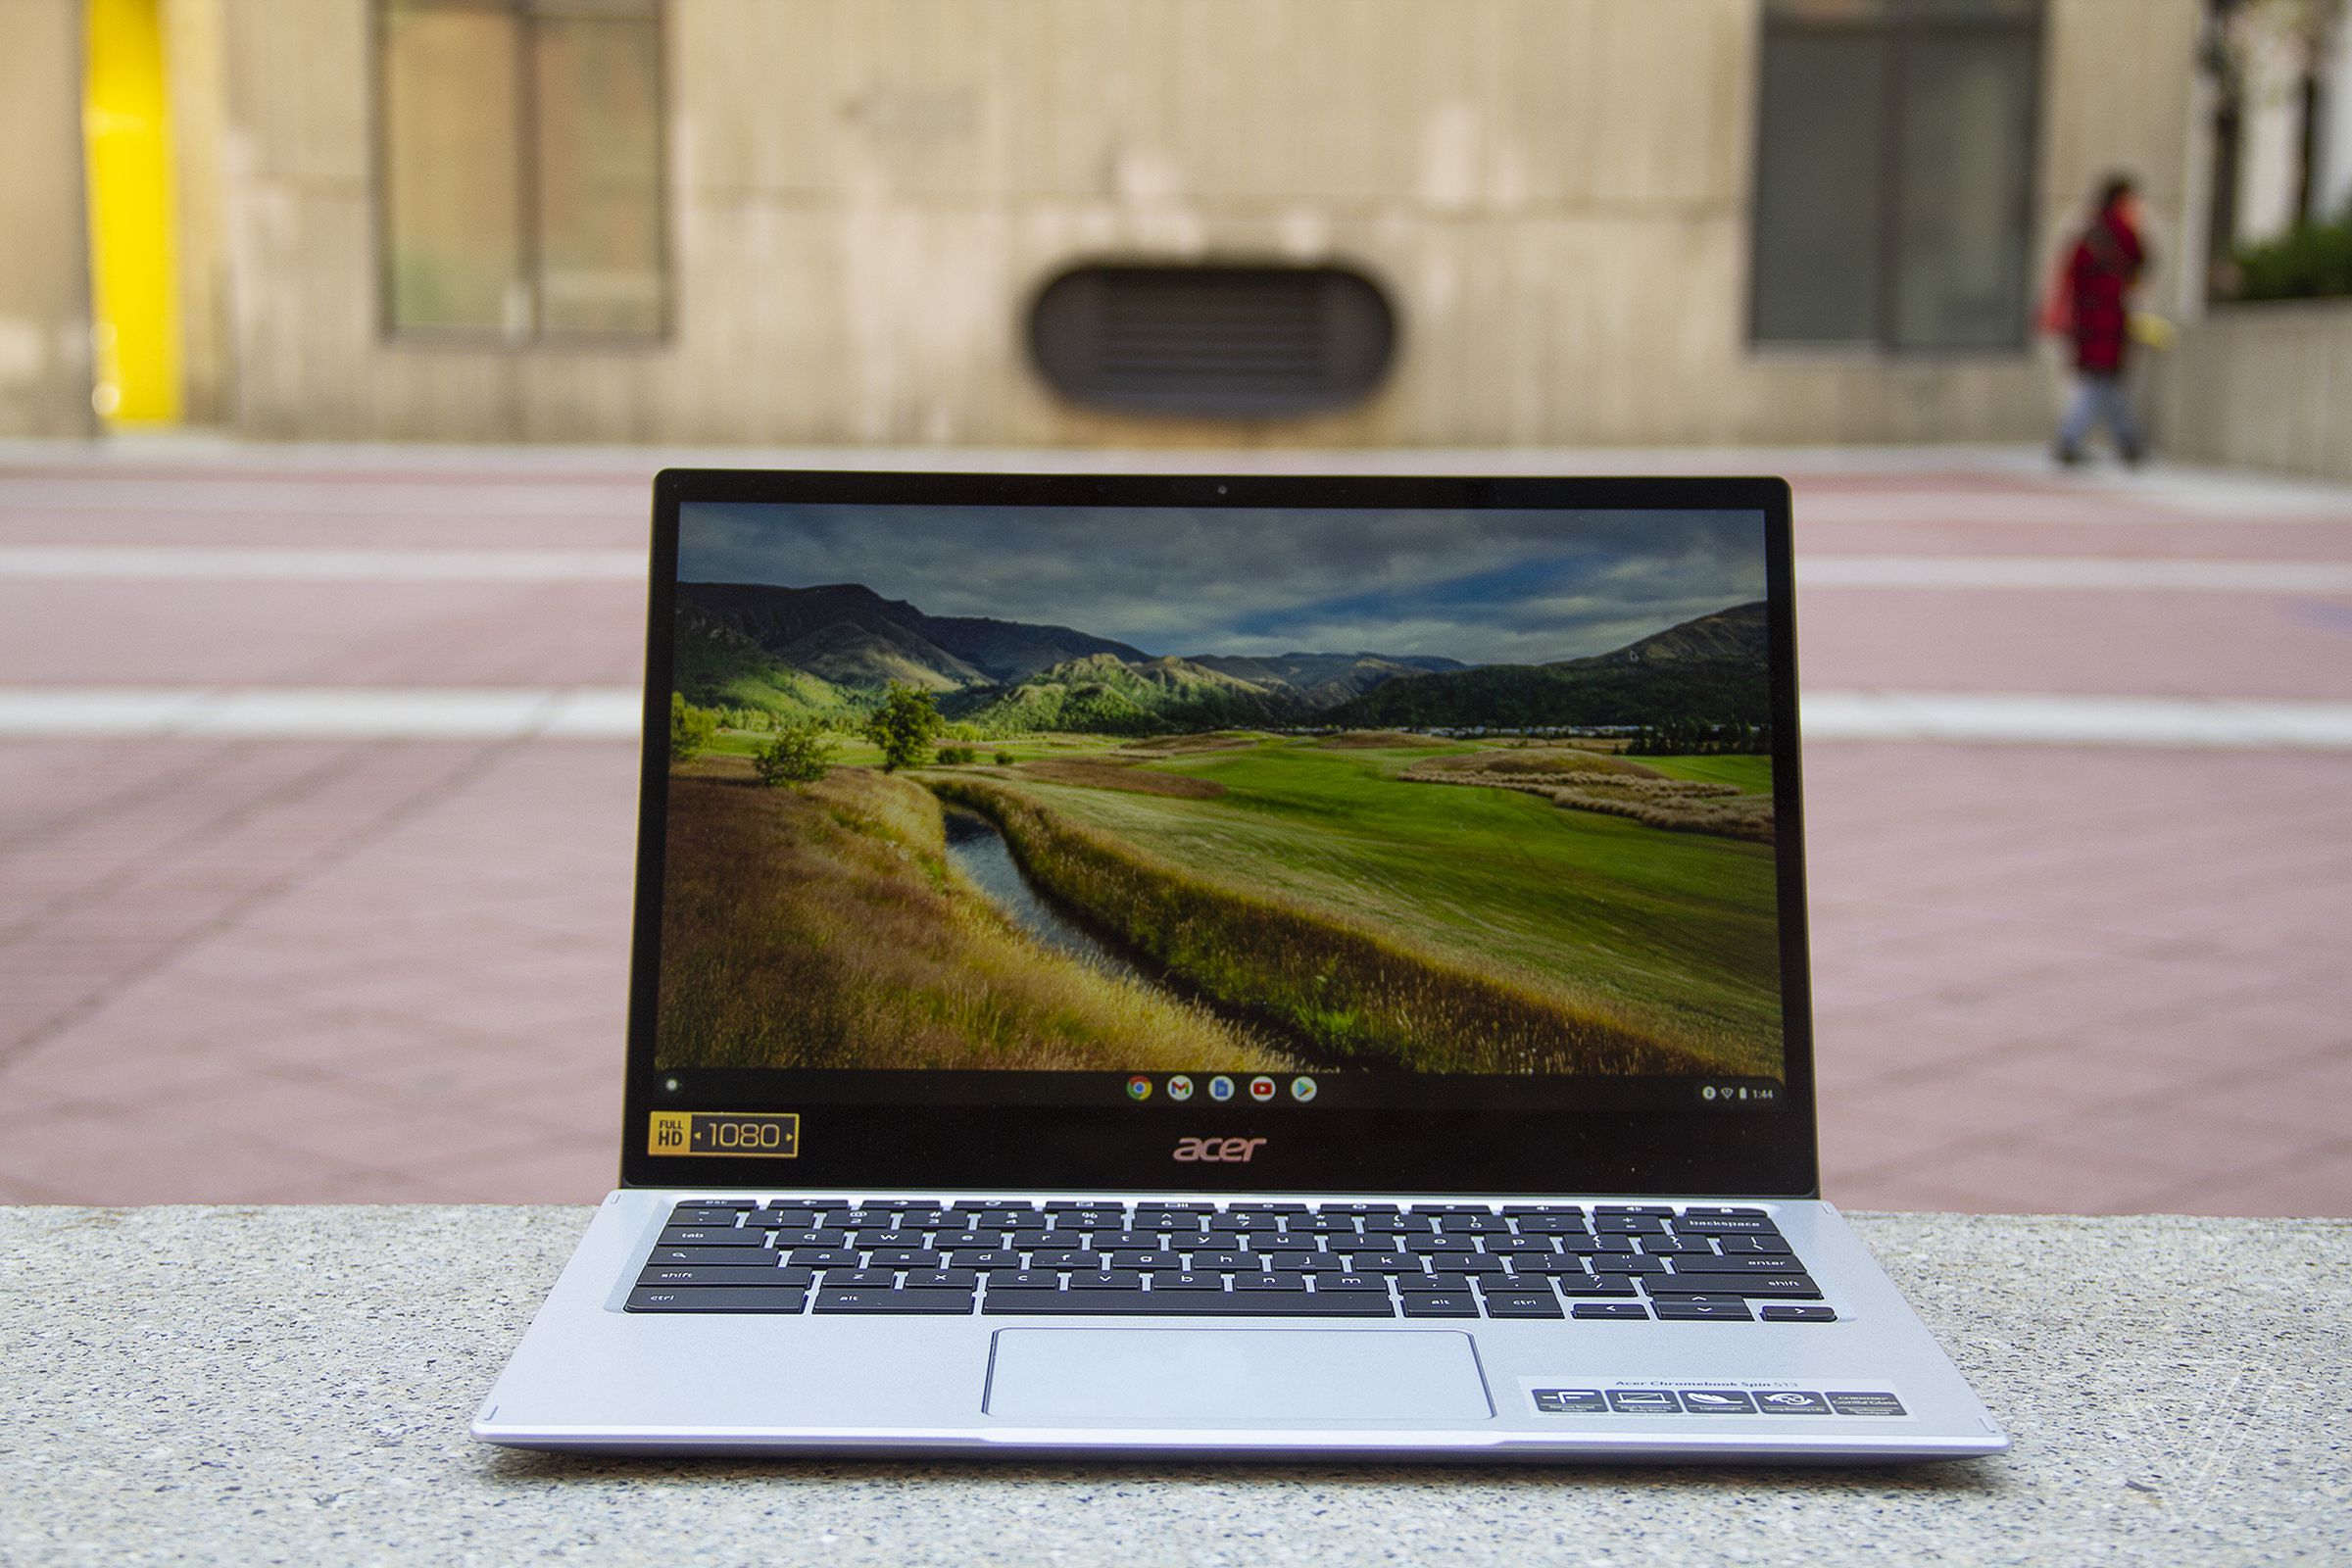 The Acer Chromebook Spin 513 sits on a stone bench, open. The screen displays a pastoral scene.